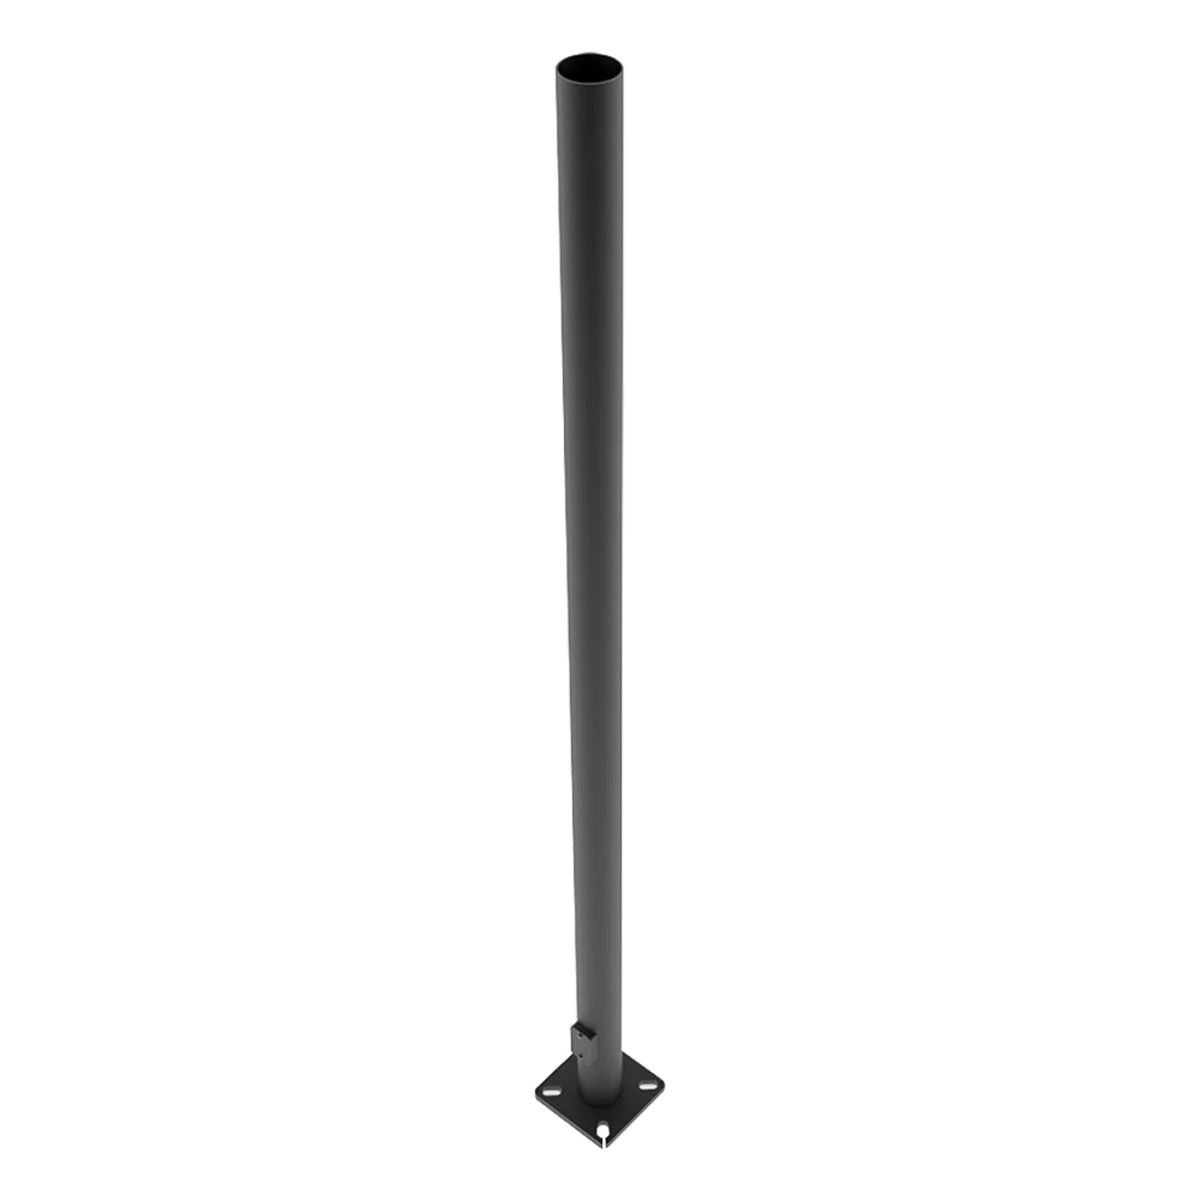 15 Ft Round Steel Drilled Pole 4 In. Shaft 11 Gauge - Bees Lighting